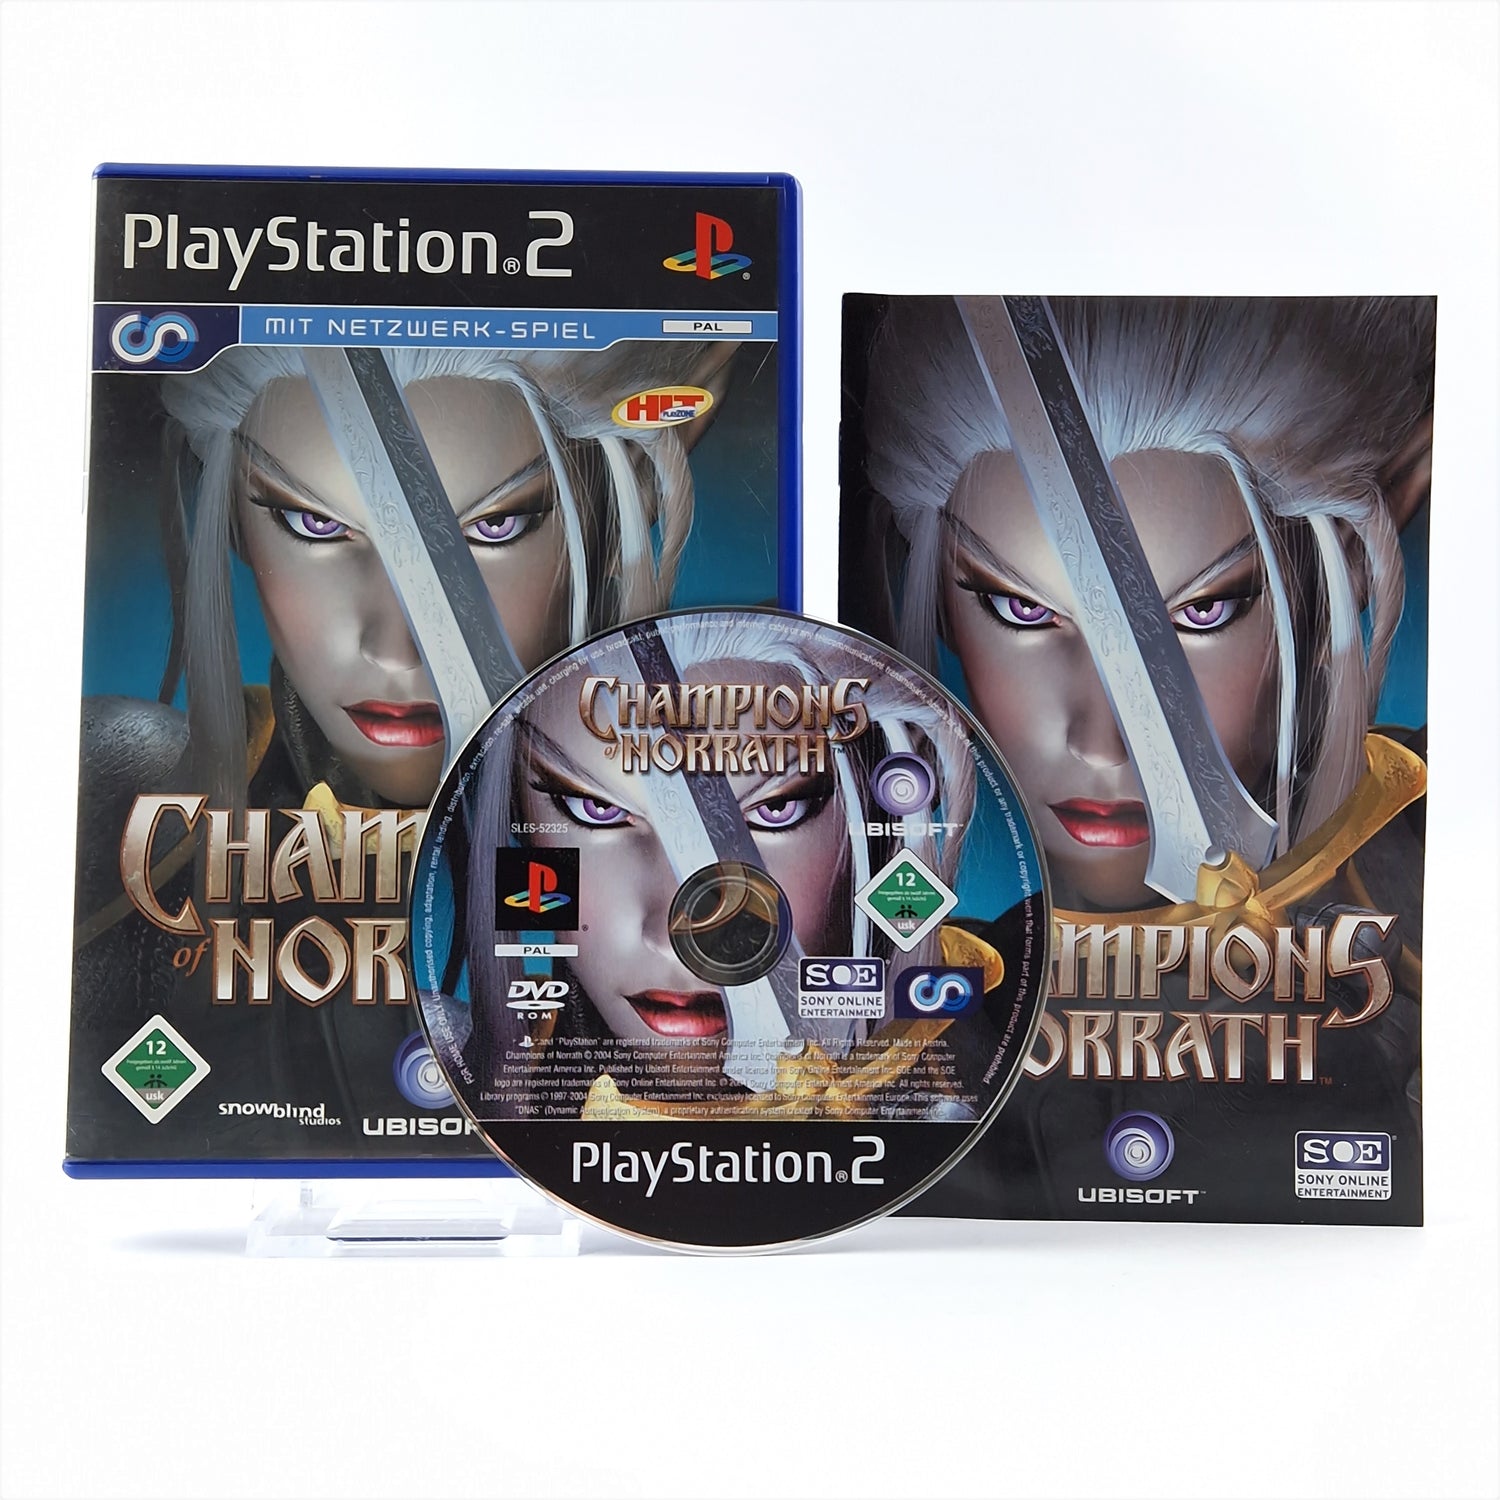 Playstation 2 game: Champions of Norrath - OVP instructions CD | PS2 PAL game